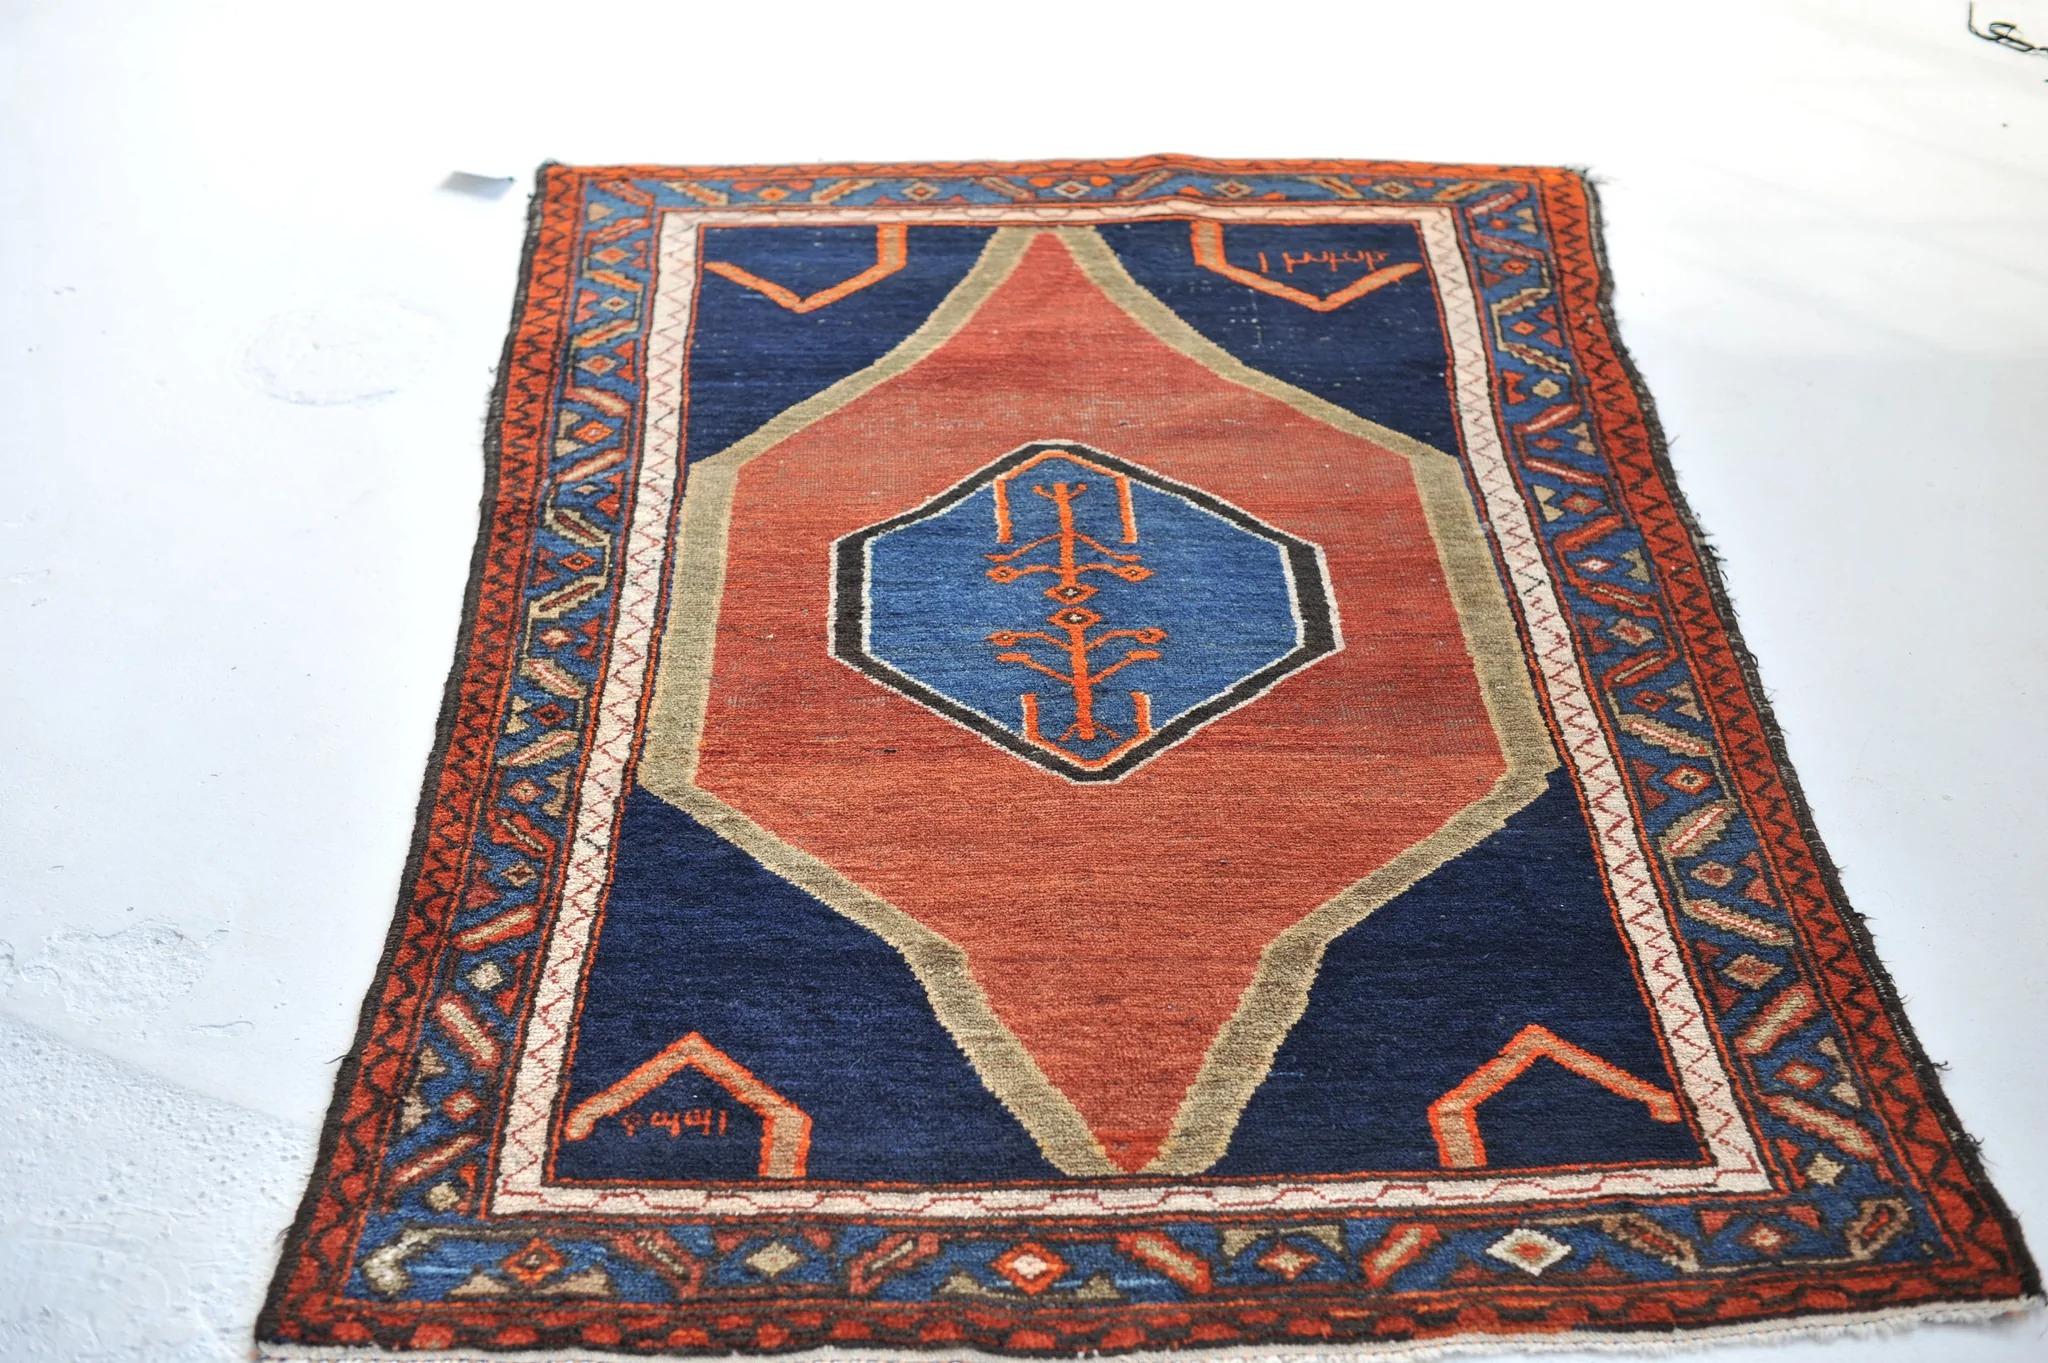 Dated Minimal Tribal Beauty Antique Rug, 1954 For Sale 4